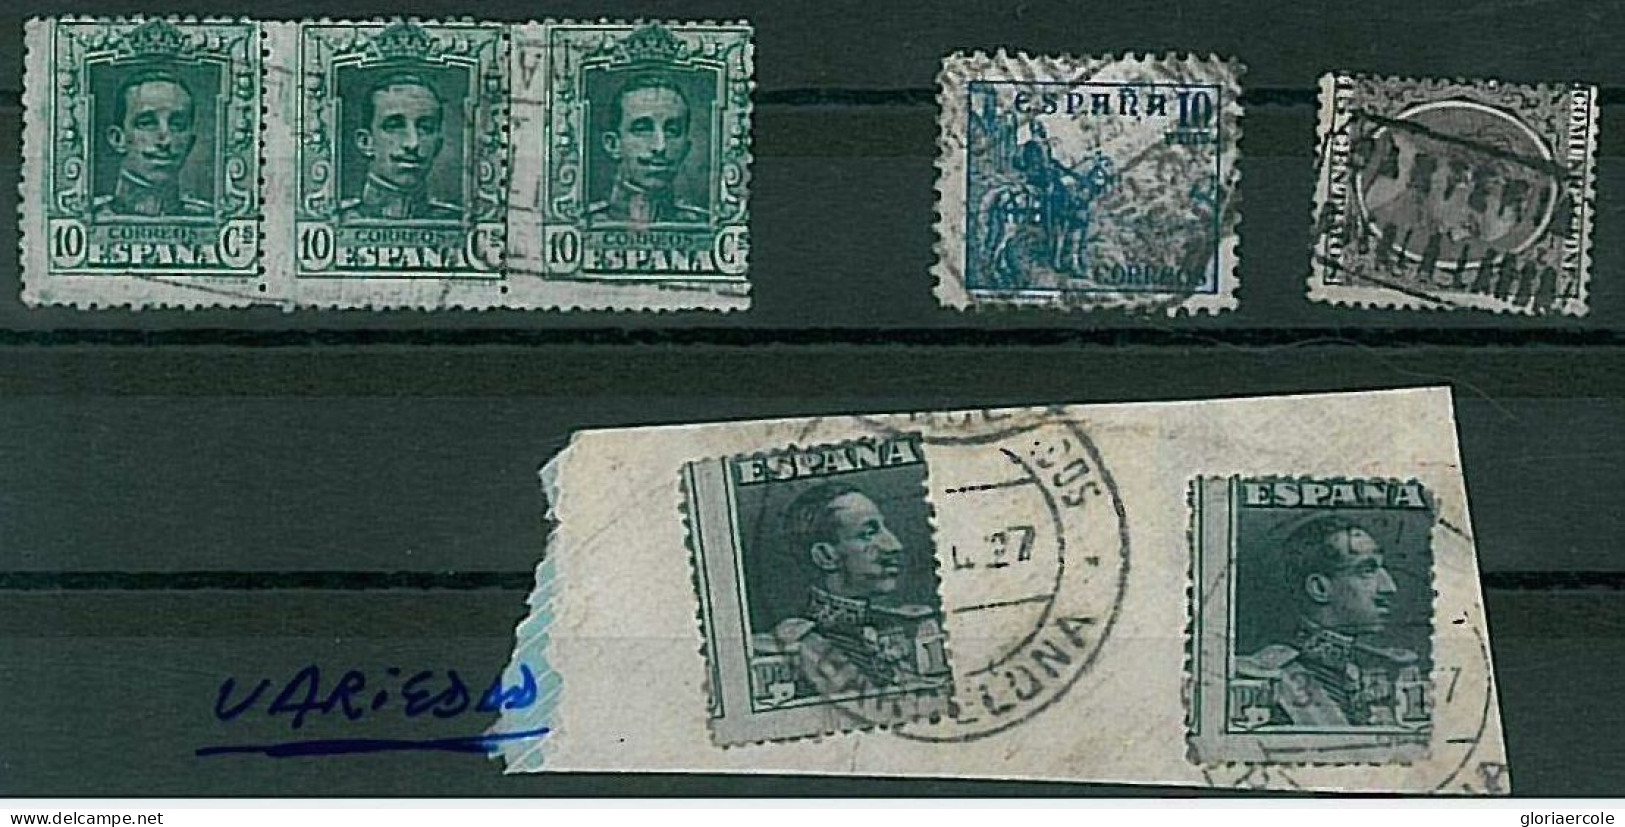 34695 - SPAIN   - STAMP ERROR -  SHIFTED PERFORATION - Small Lot - Plaatfouten & Curiosa